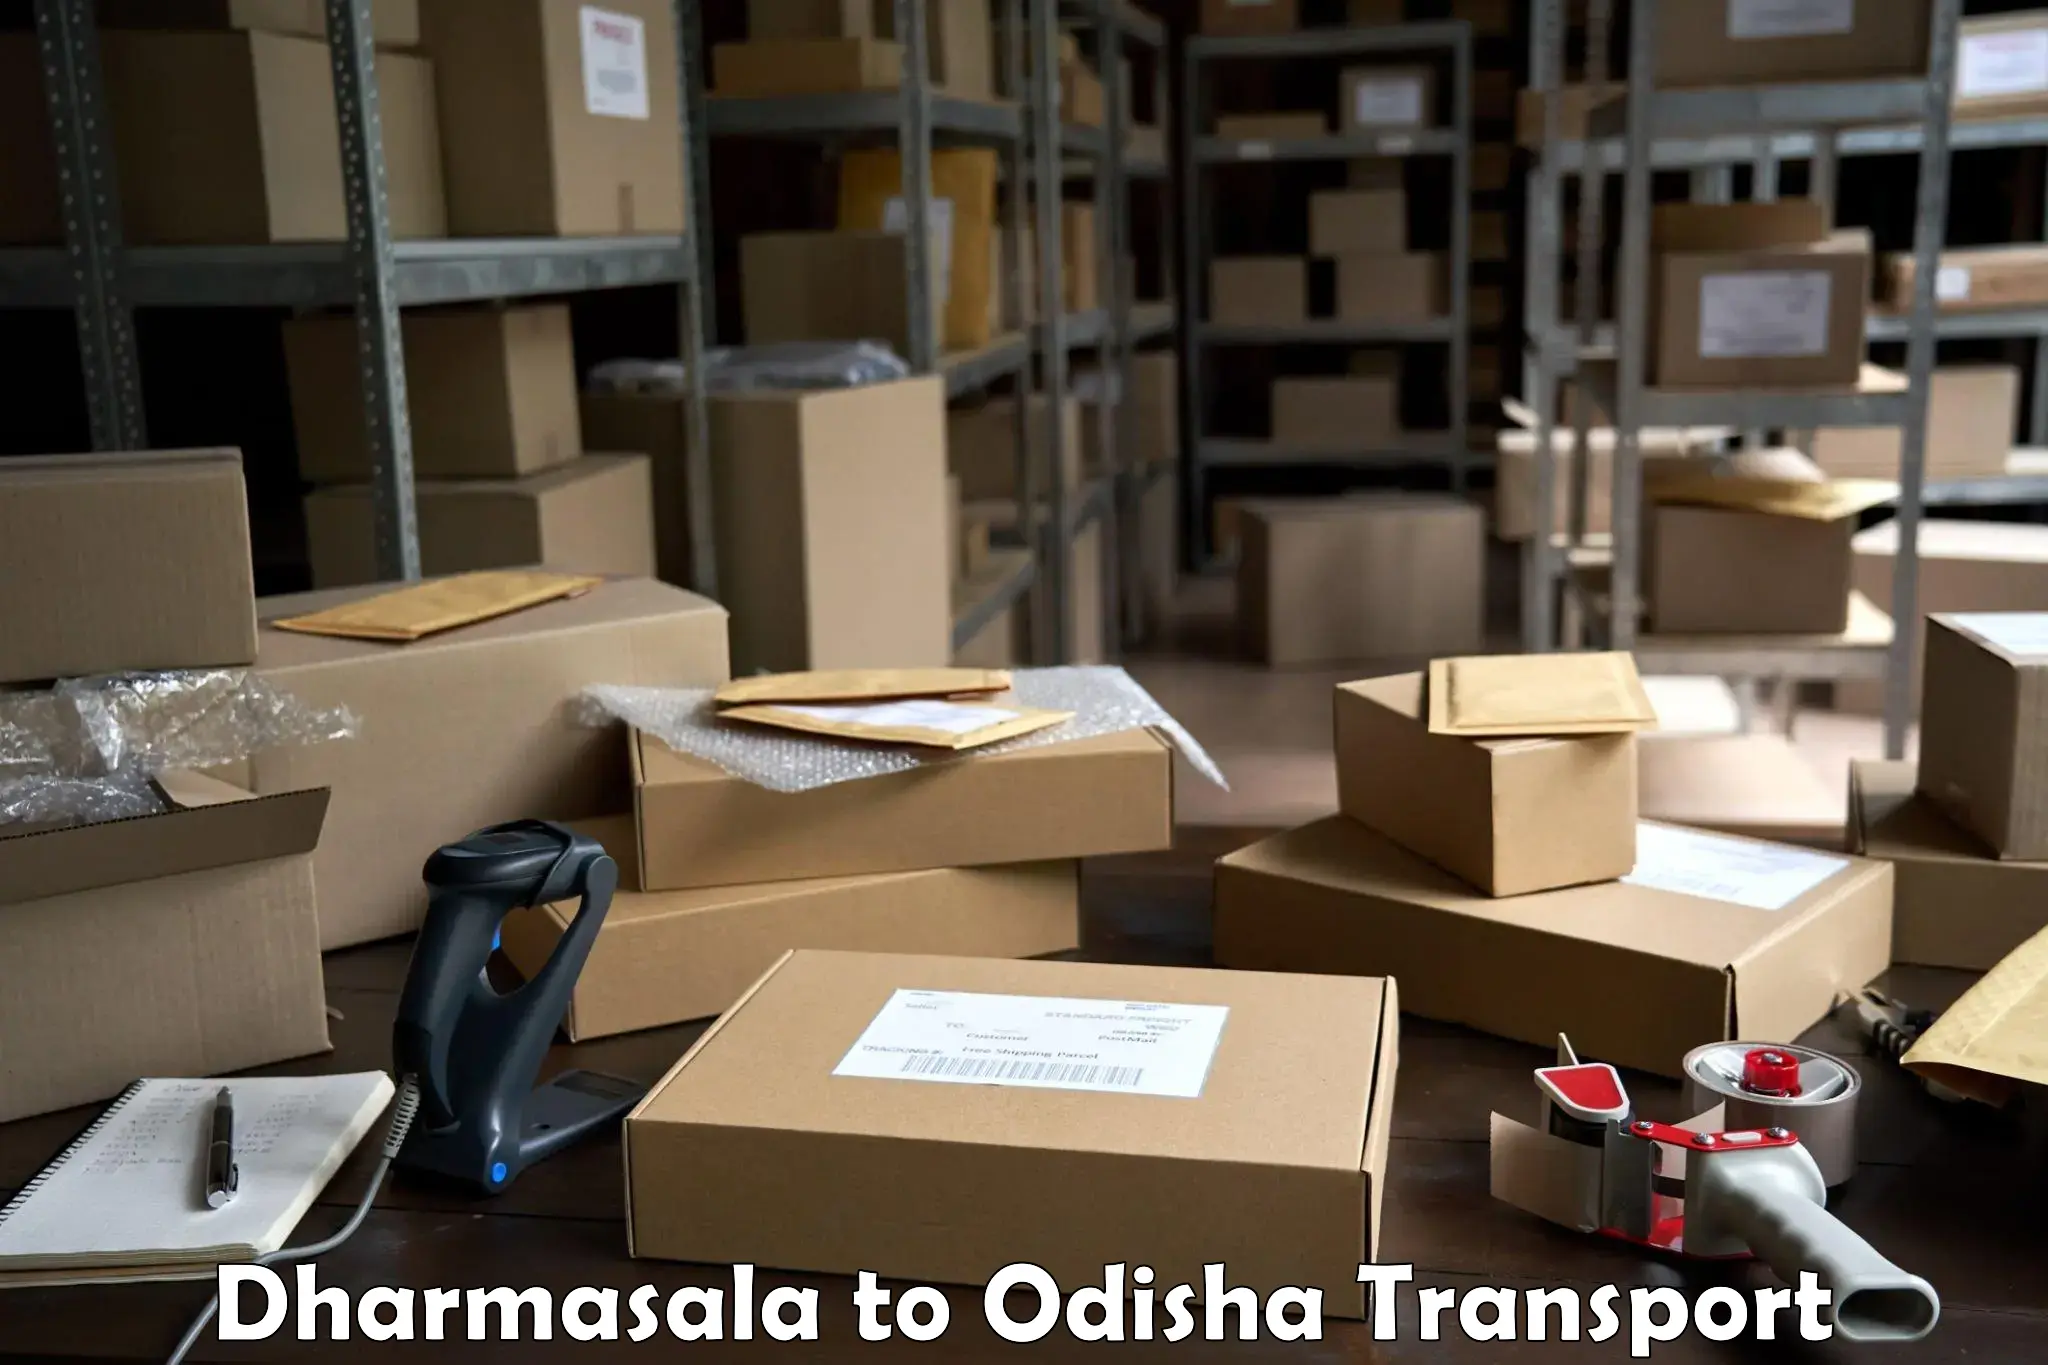 Vehicle transport services in Dharmasala to Daspalla